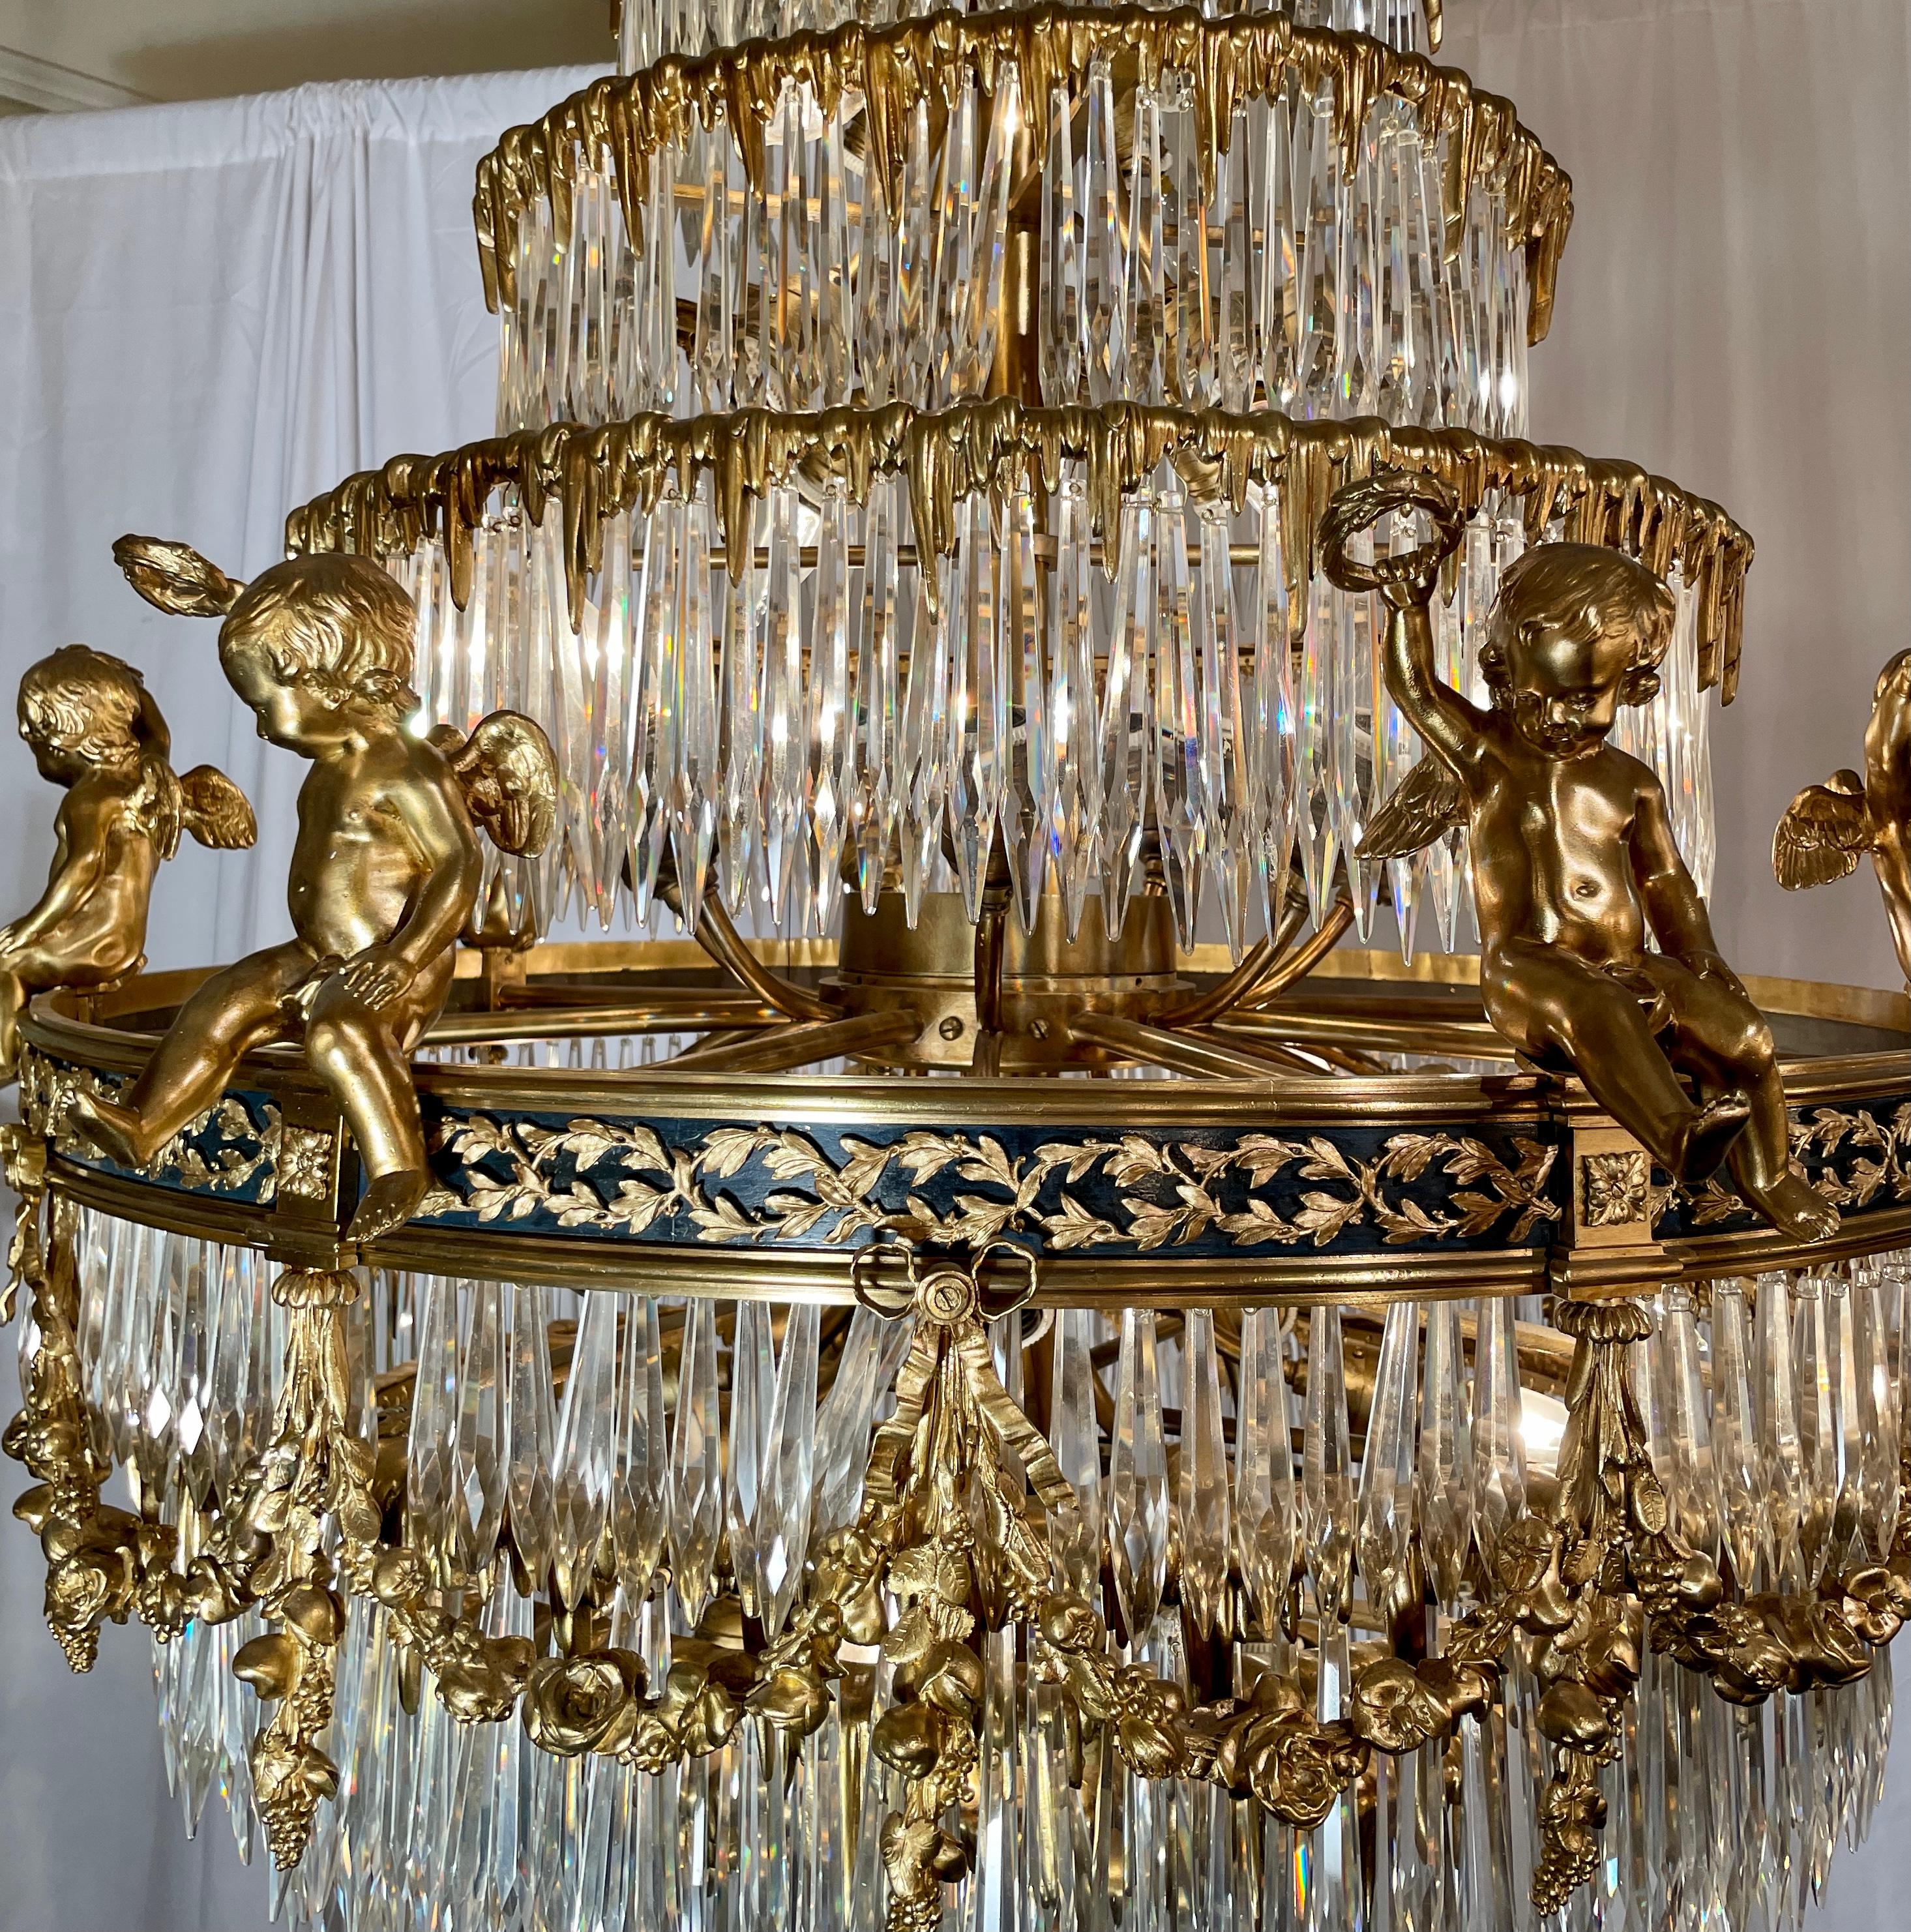 Antique French Baccarat Crystal & Bronze D'Ore Waterfall Chandelier, Circa 1880s For Sale 1